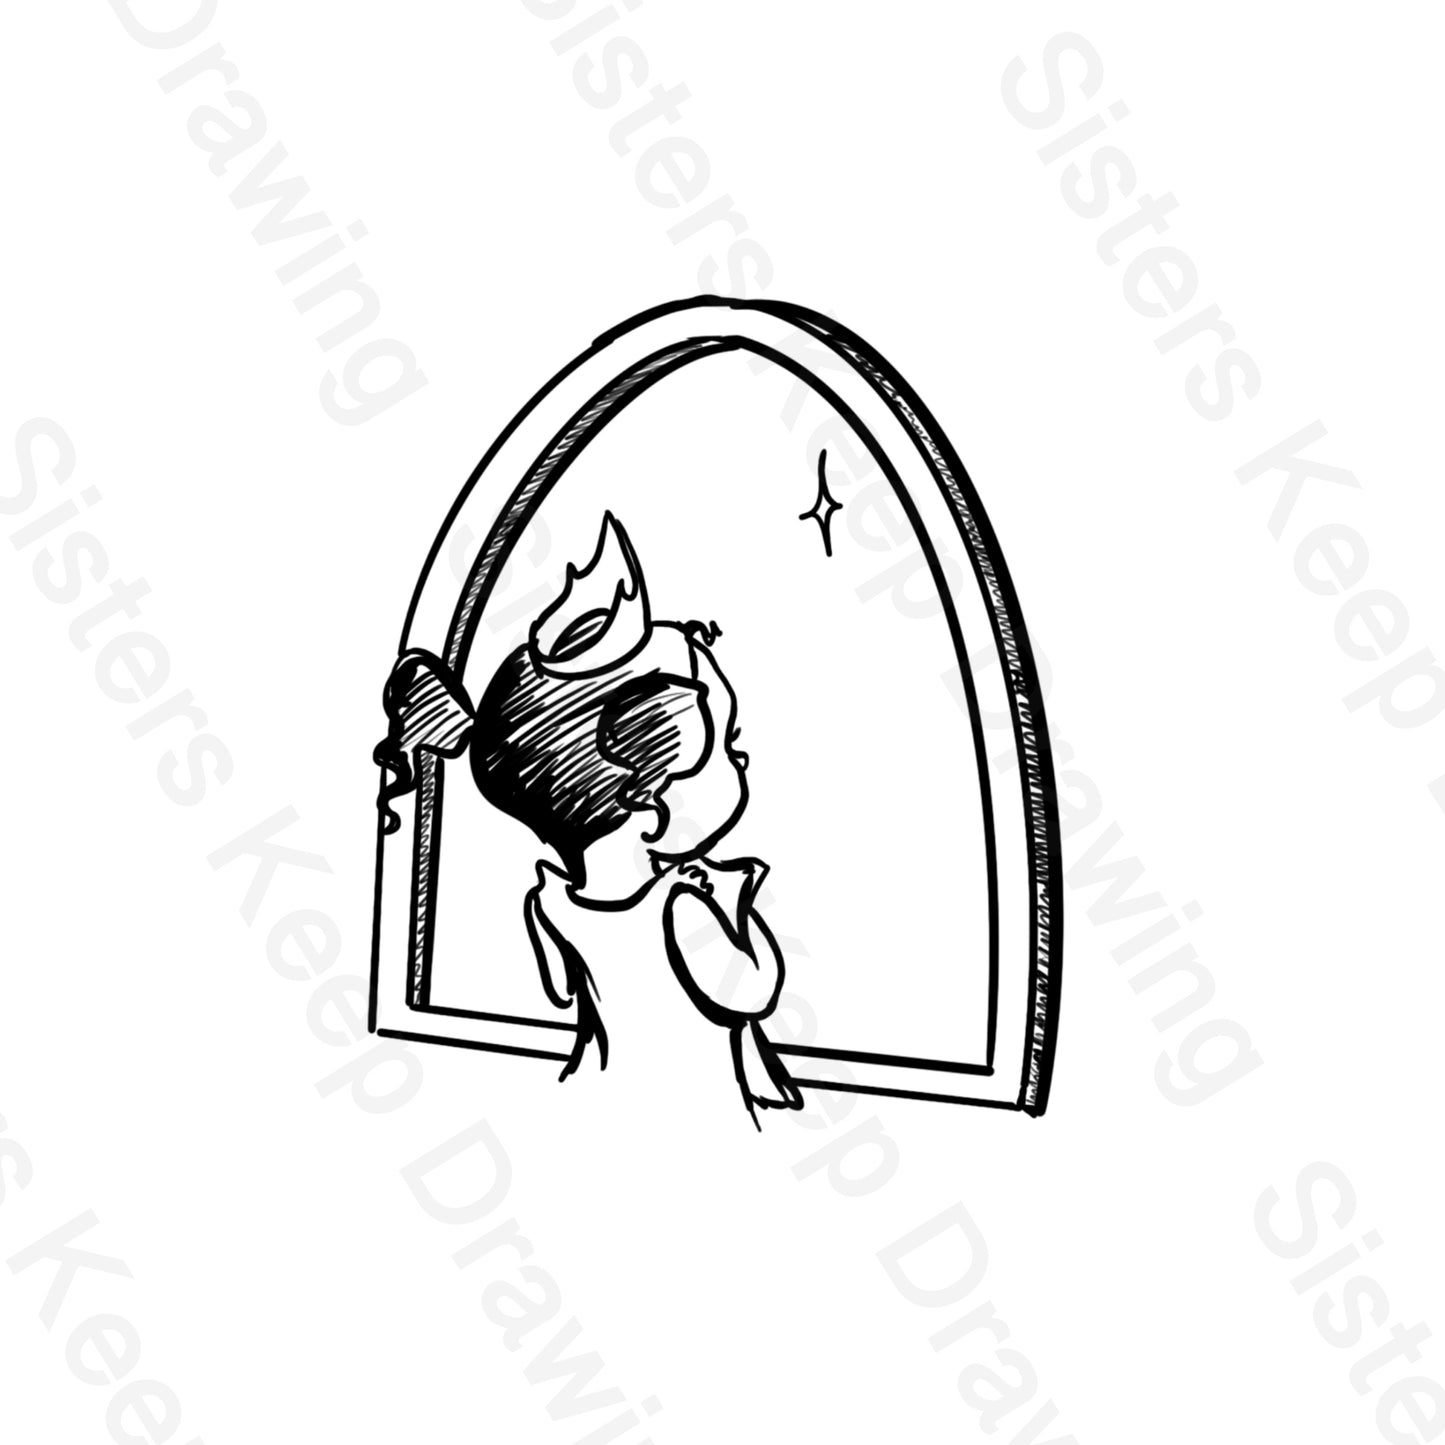 Frog Princess Looking out of her Window - Tattoo Transparent Permission PNG- instant download digital printable artwork